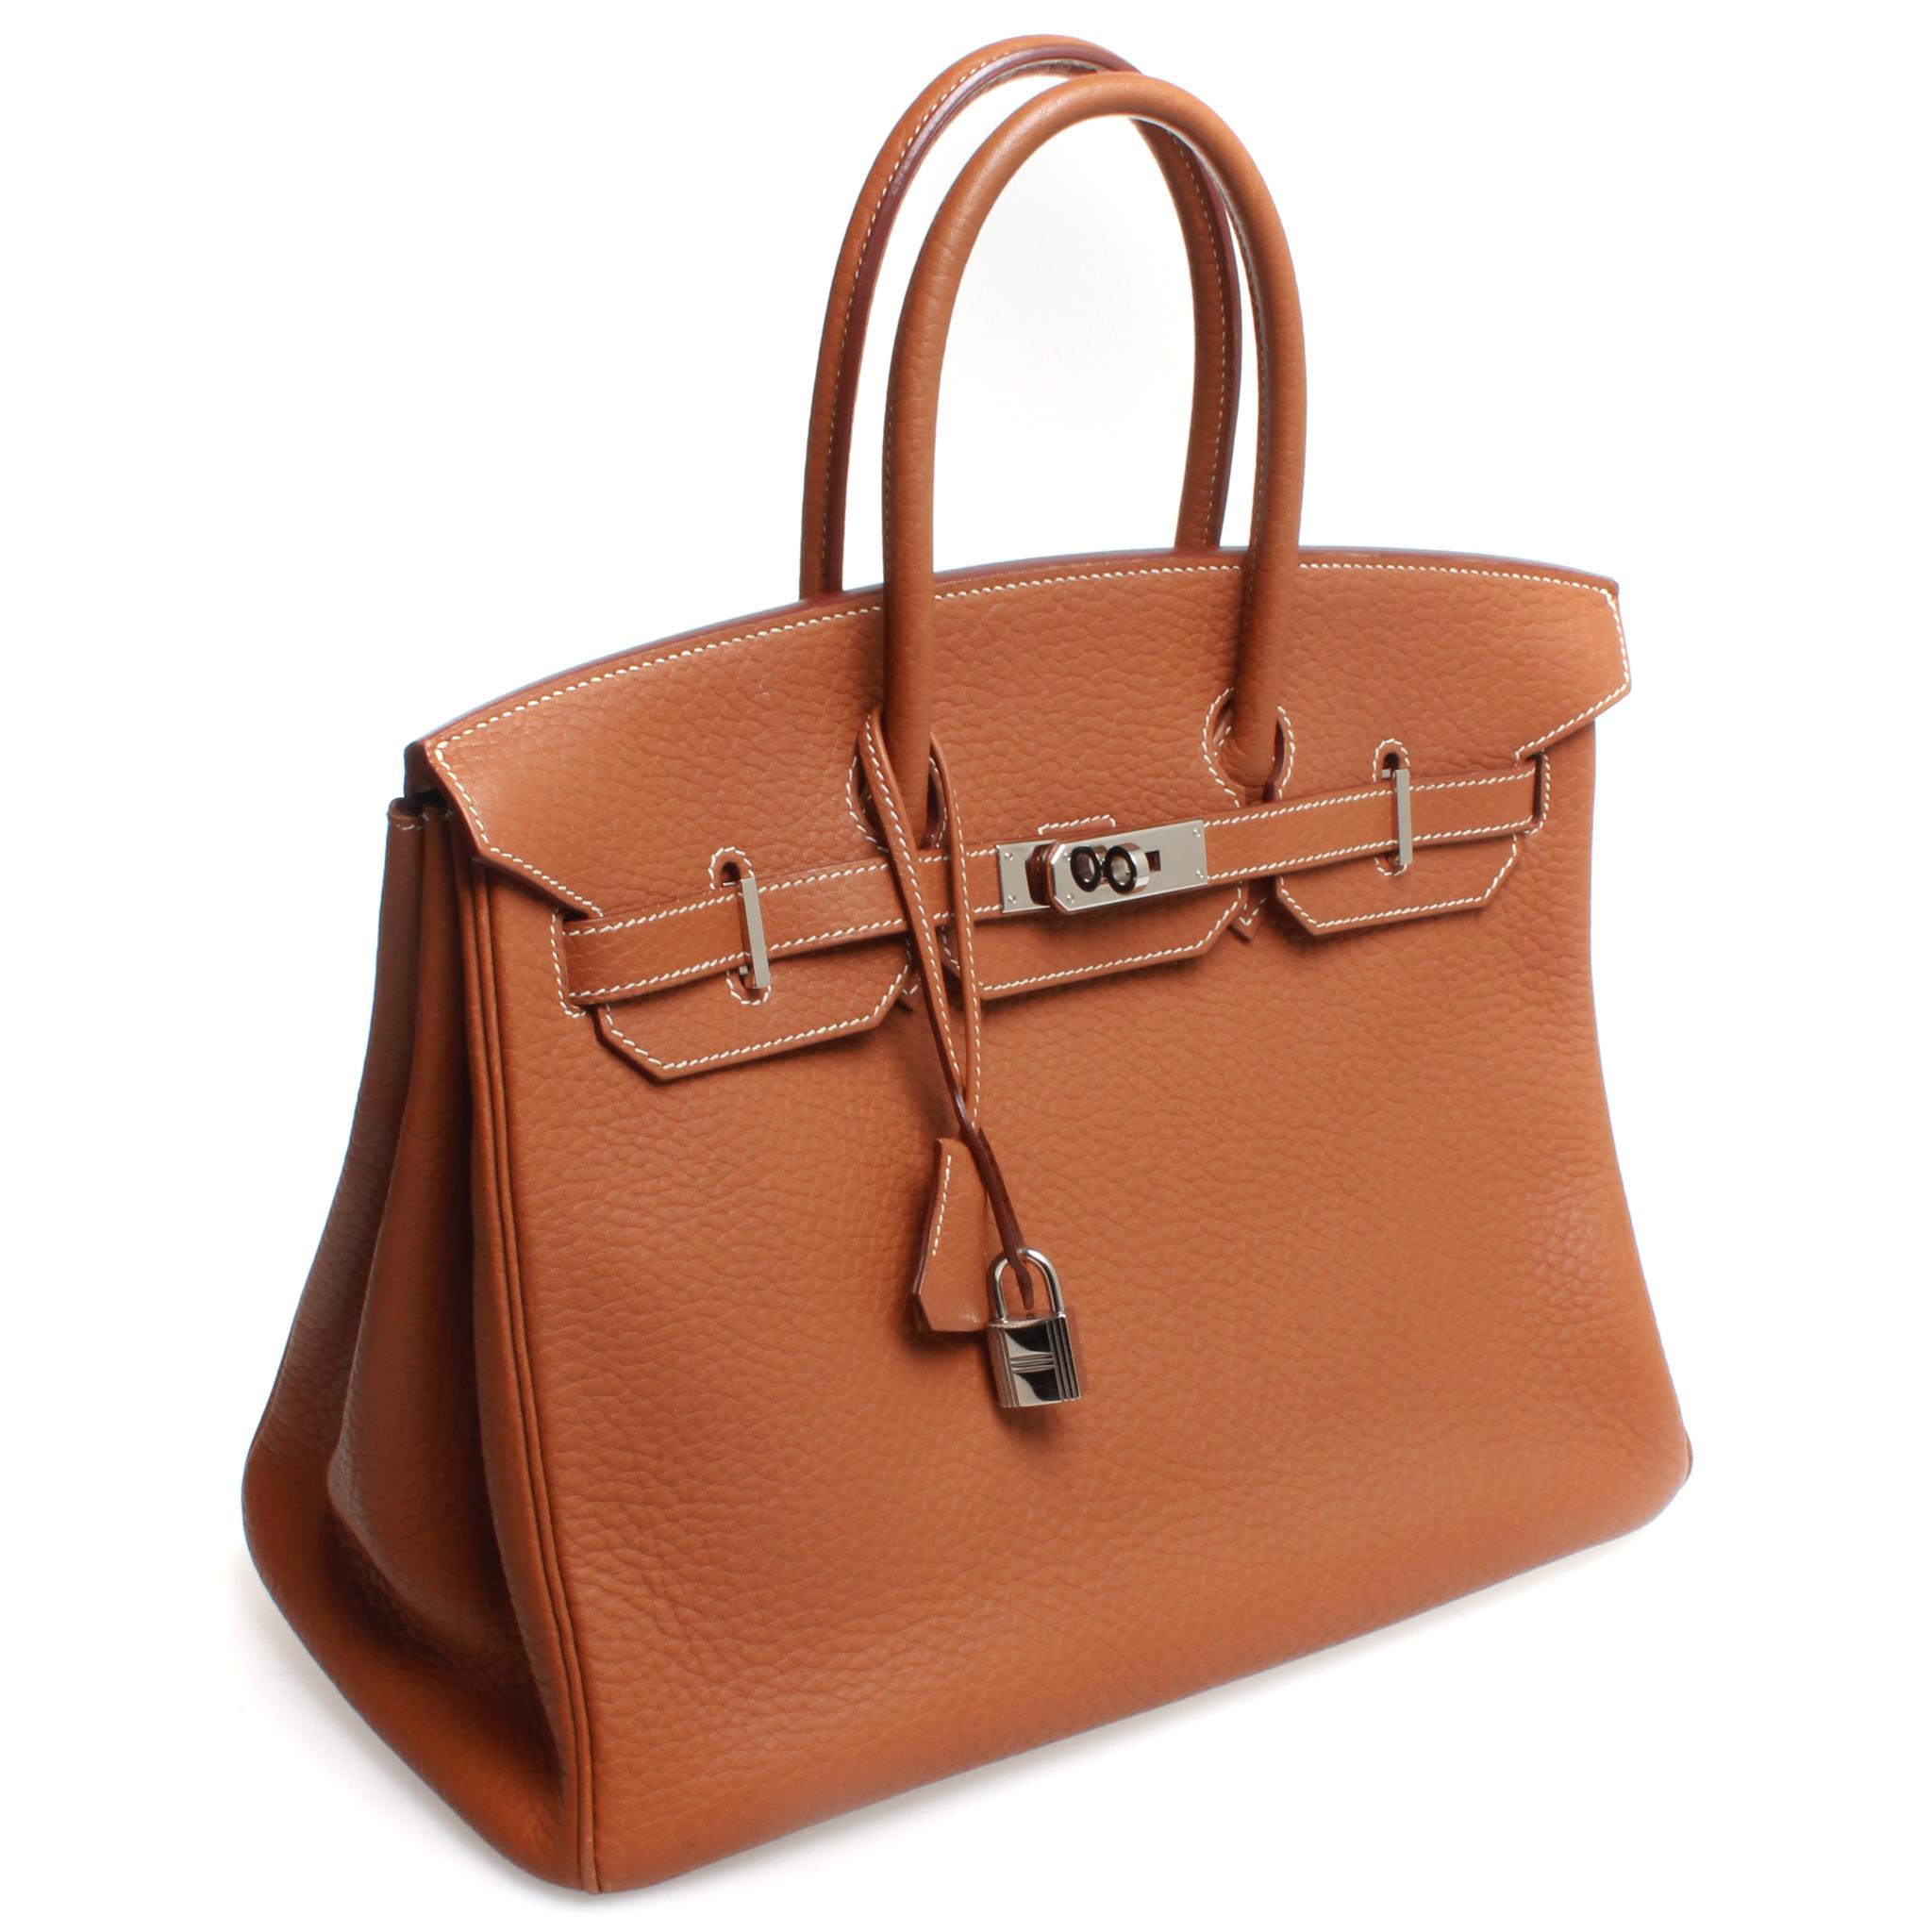 This Hermes Birkin Handbag Gold Togo with silver Hardware 35, crafted from Gold brown togo leather, features dual rolled handles and front flap. Its turn-lock closure opens to a gorgeous leather interior with slip pocket.

Date stamp reads: K in a